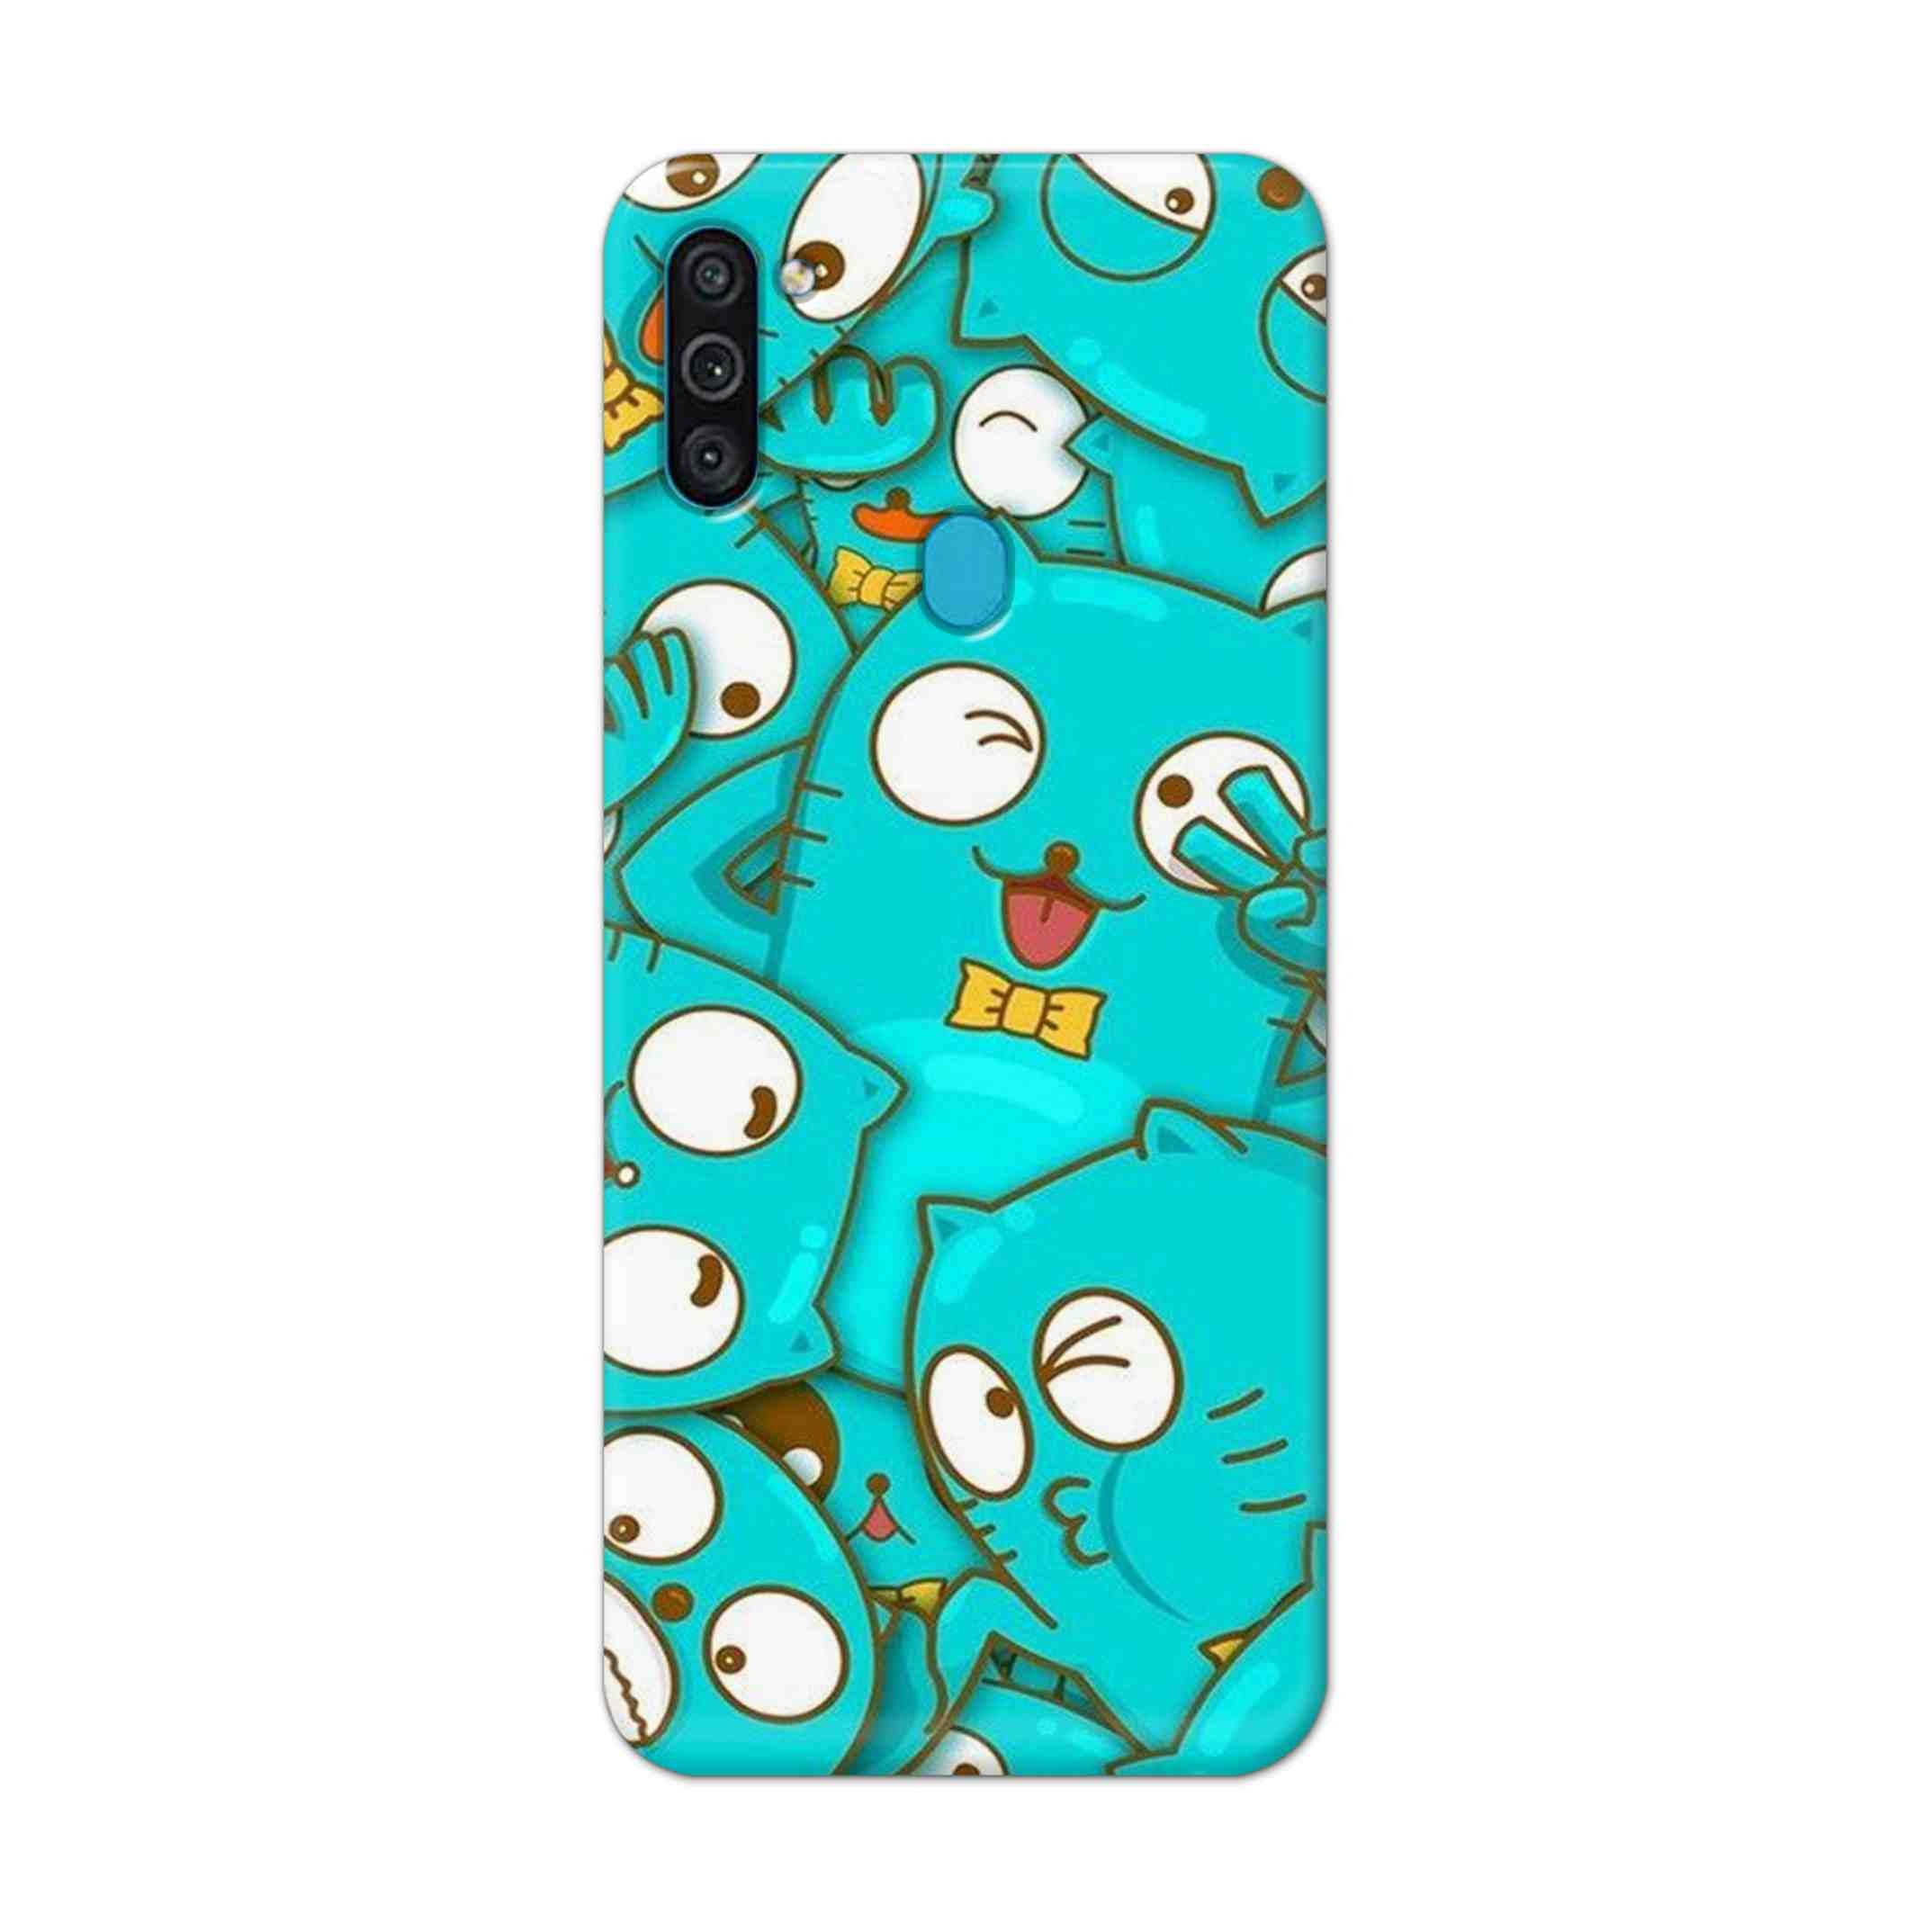 Buy Cat Hard Back Mobile Phone Case Cover For Samsung Galaxy M11 Online